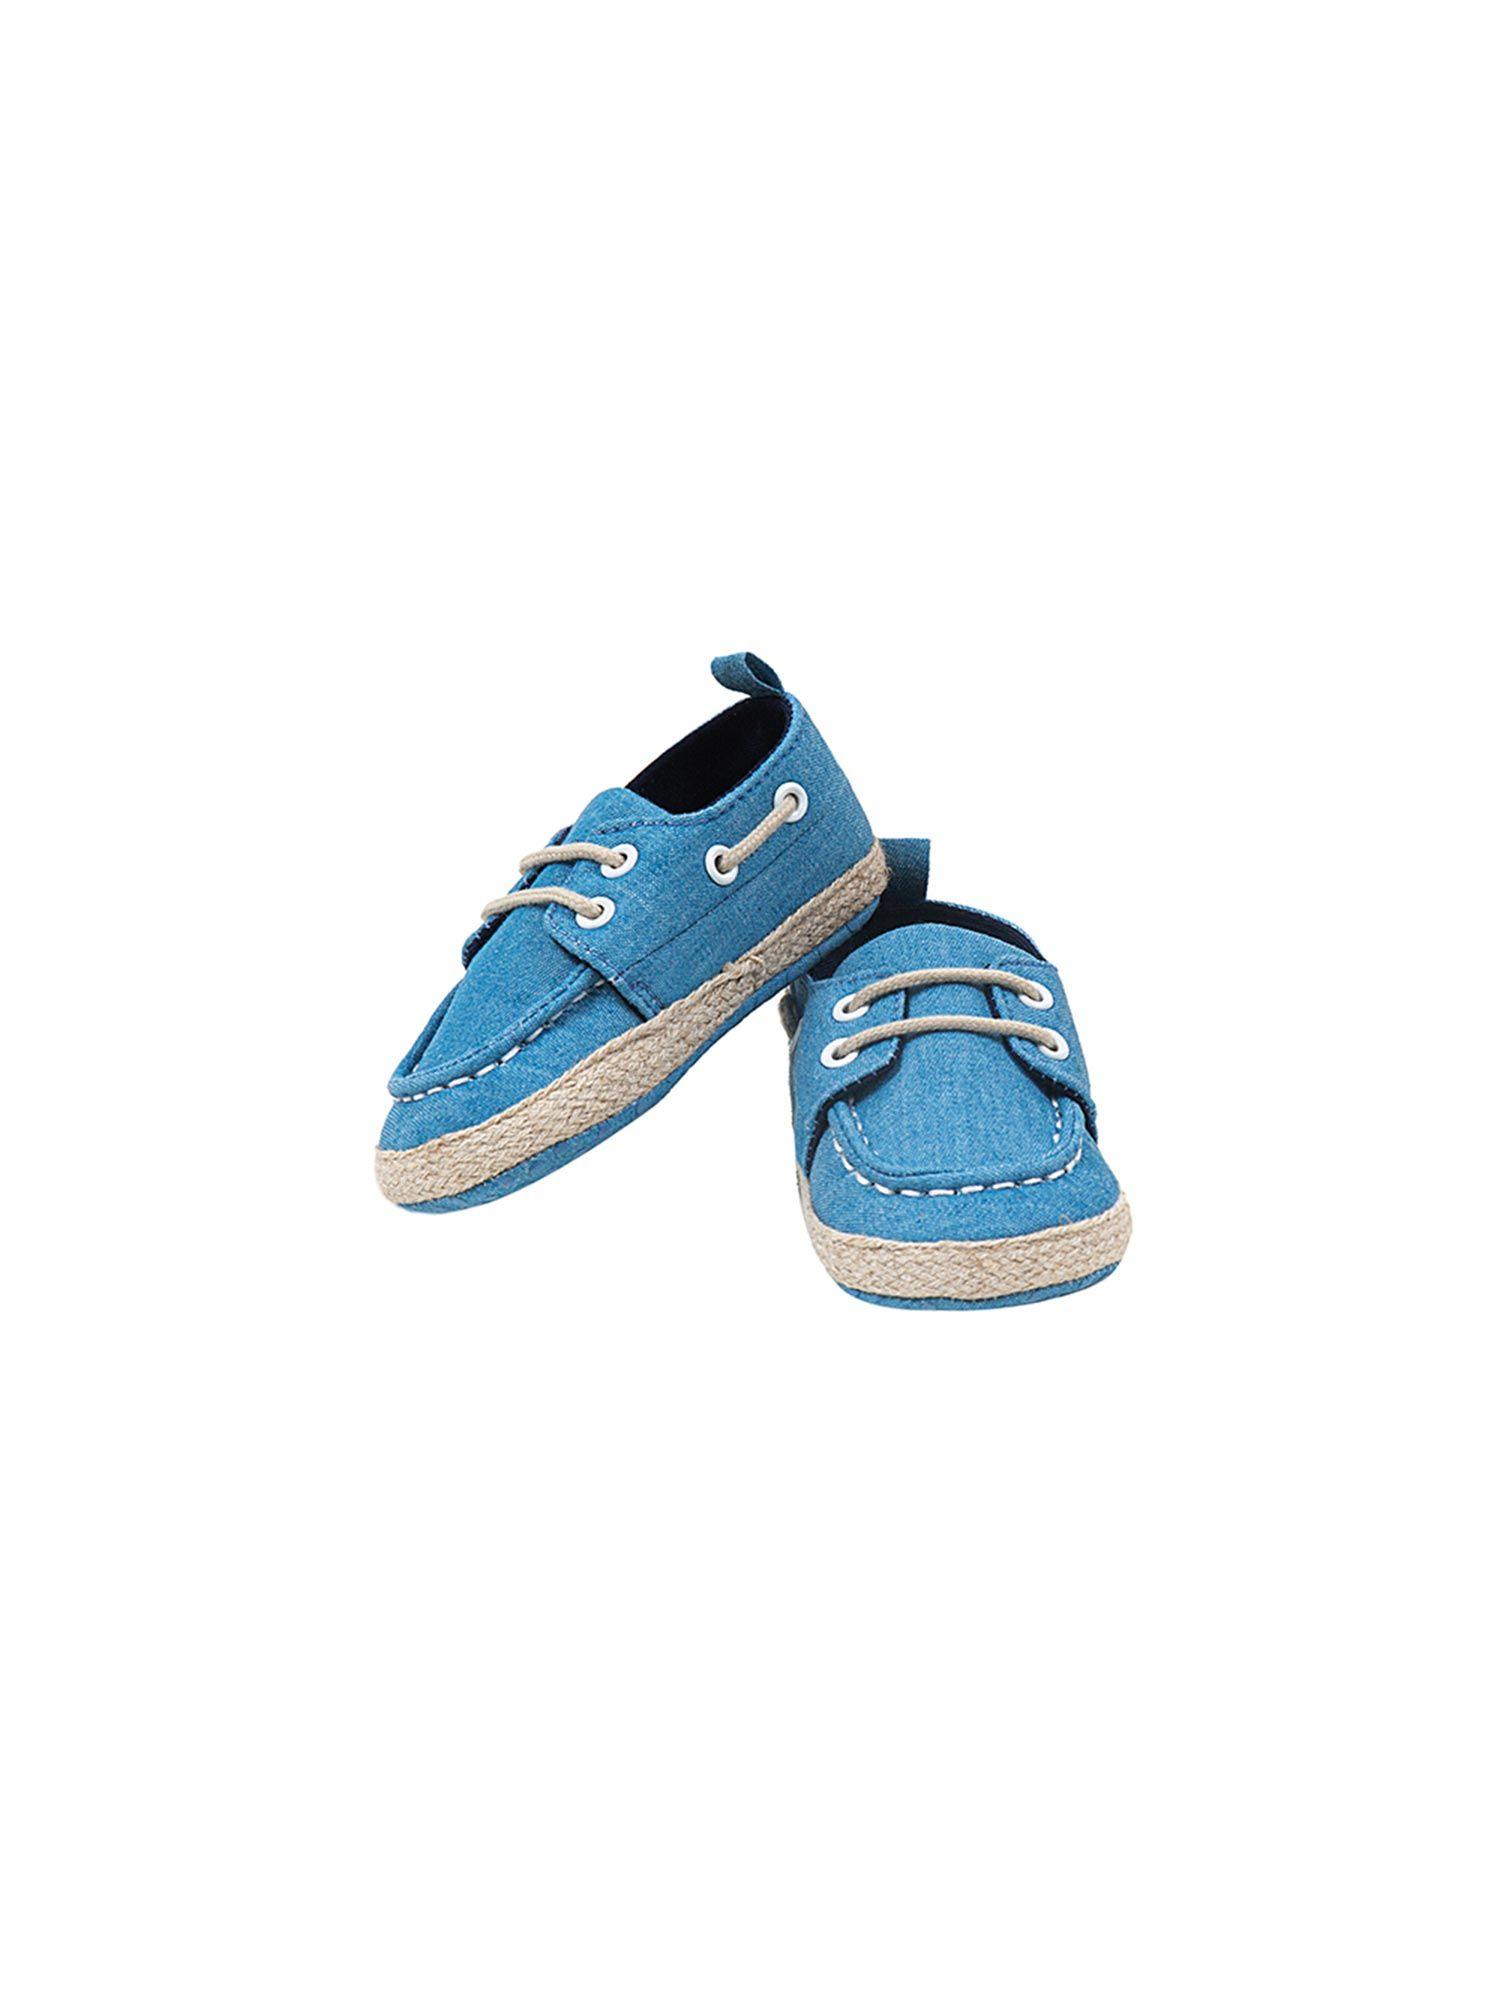 formal blue baby boat shoes